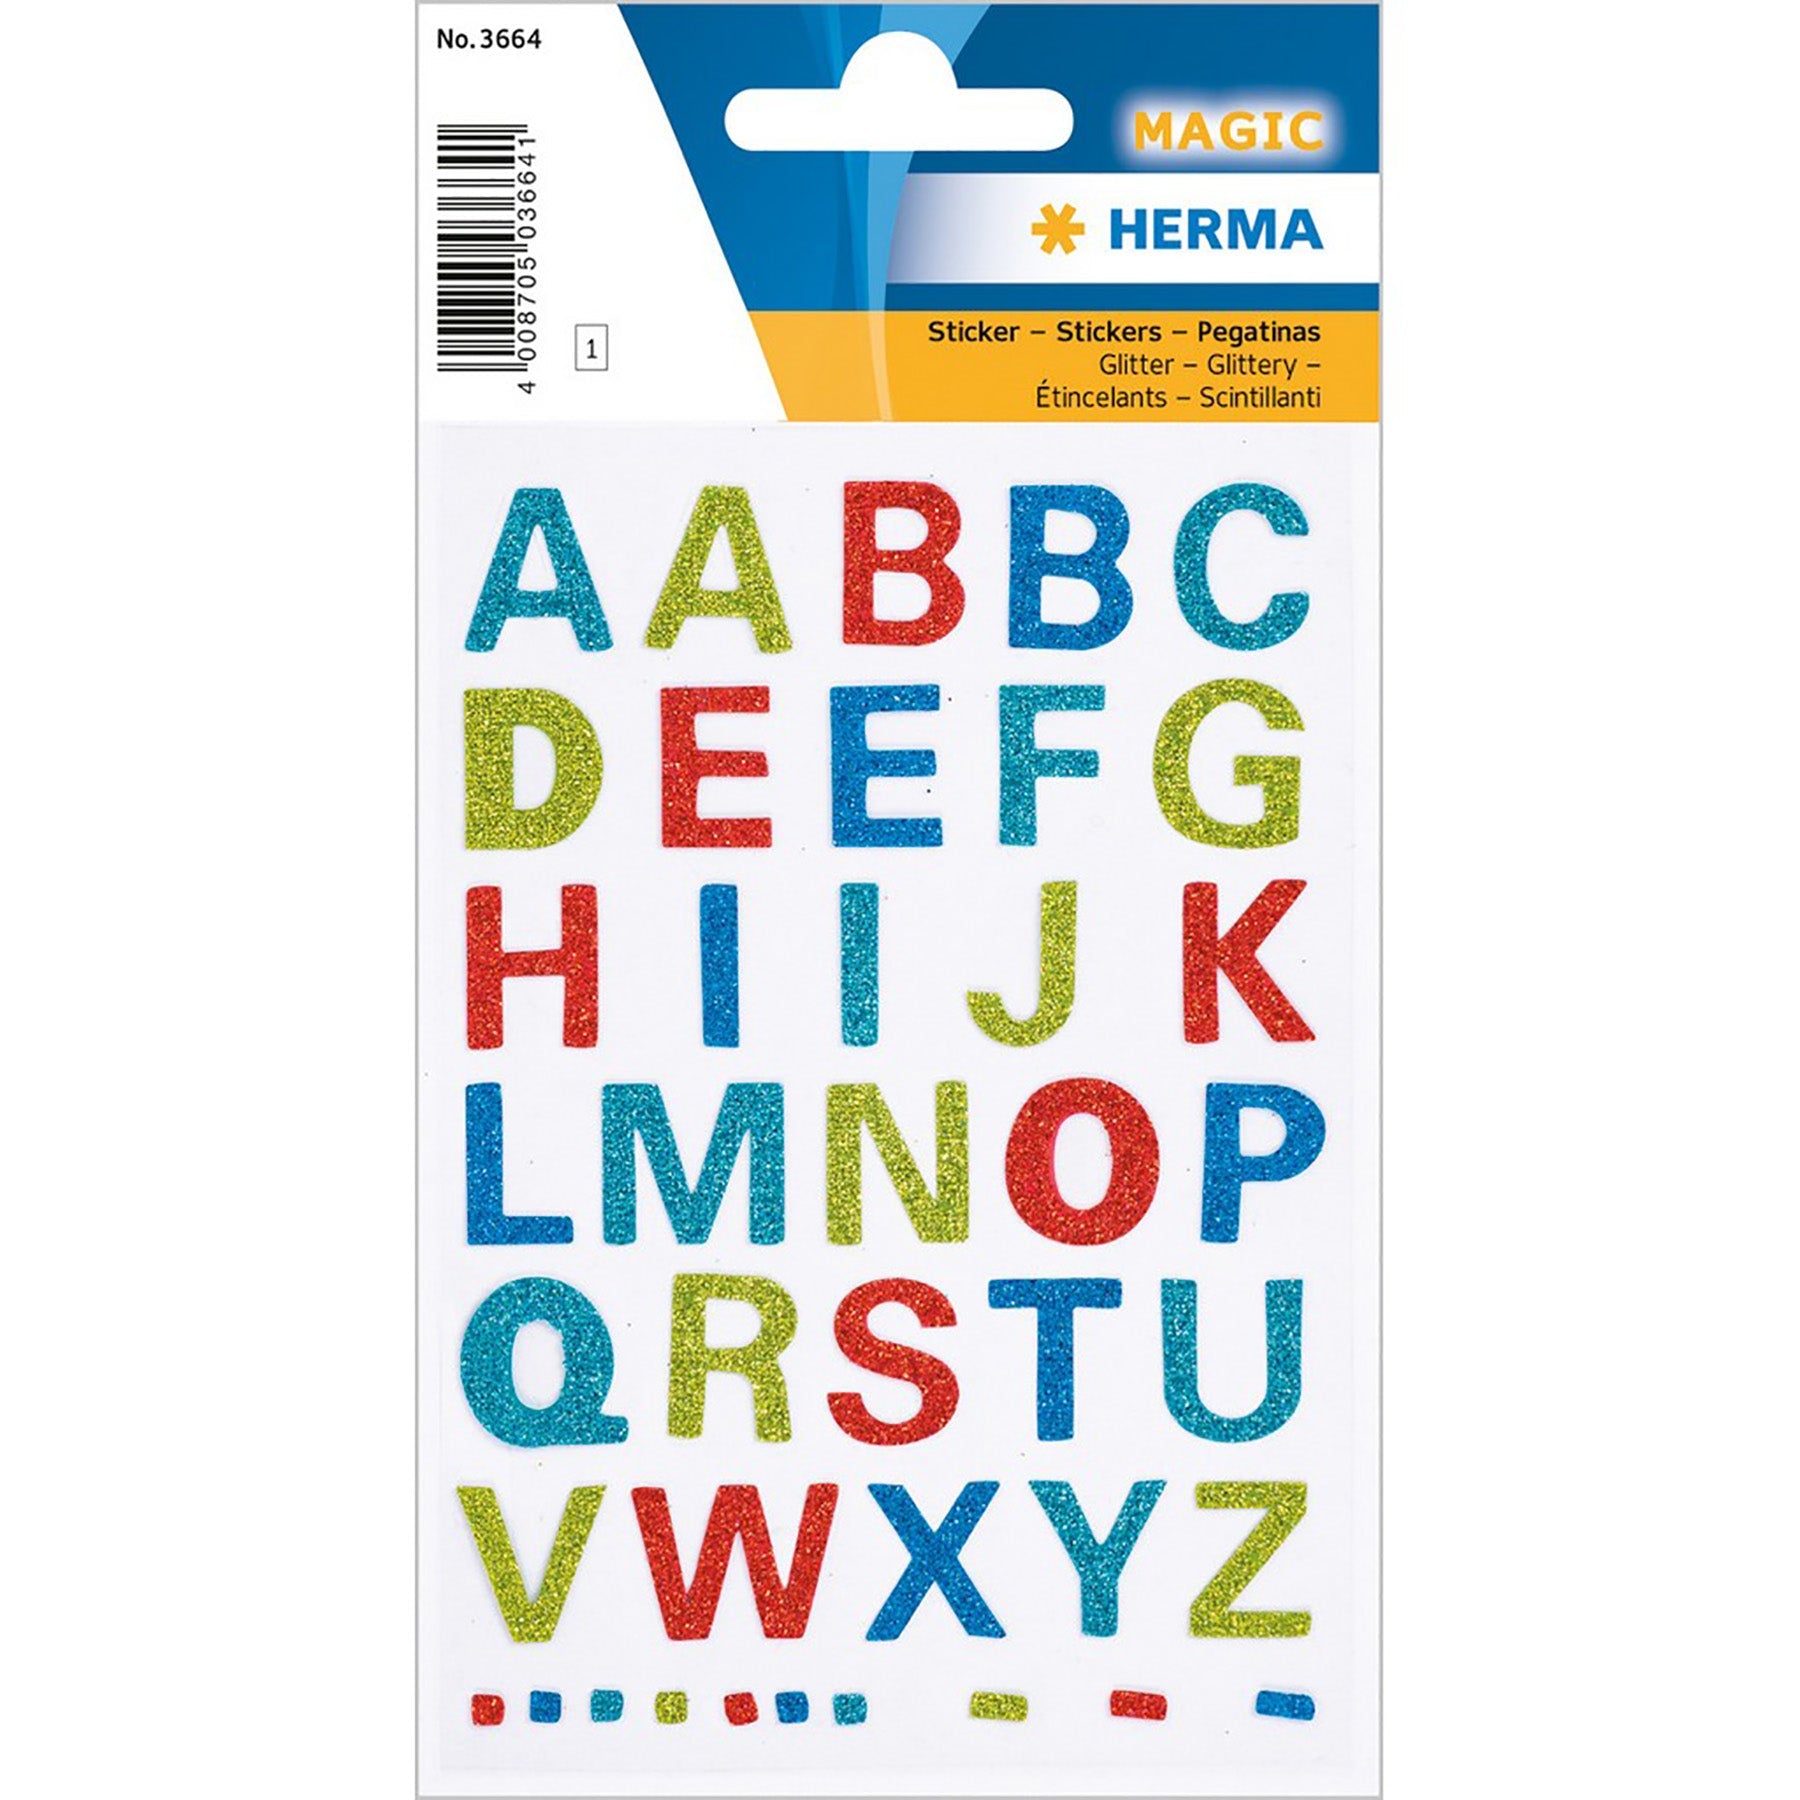 Herma Magic Stickers Letters Glittery  0.55in each